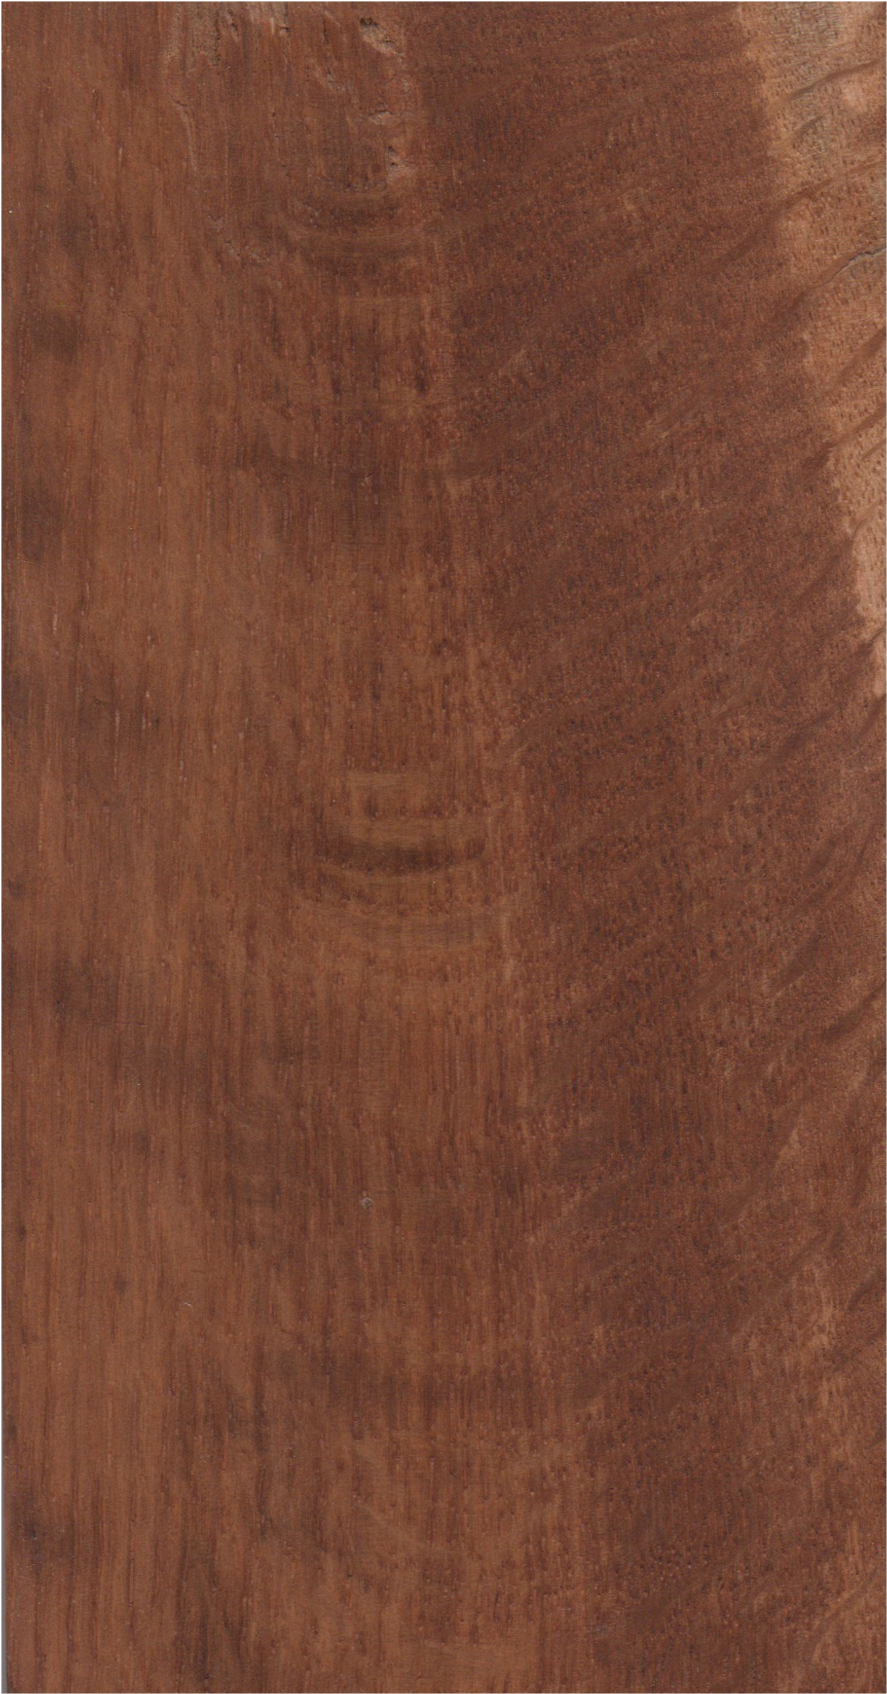 Piece Of Wood Png